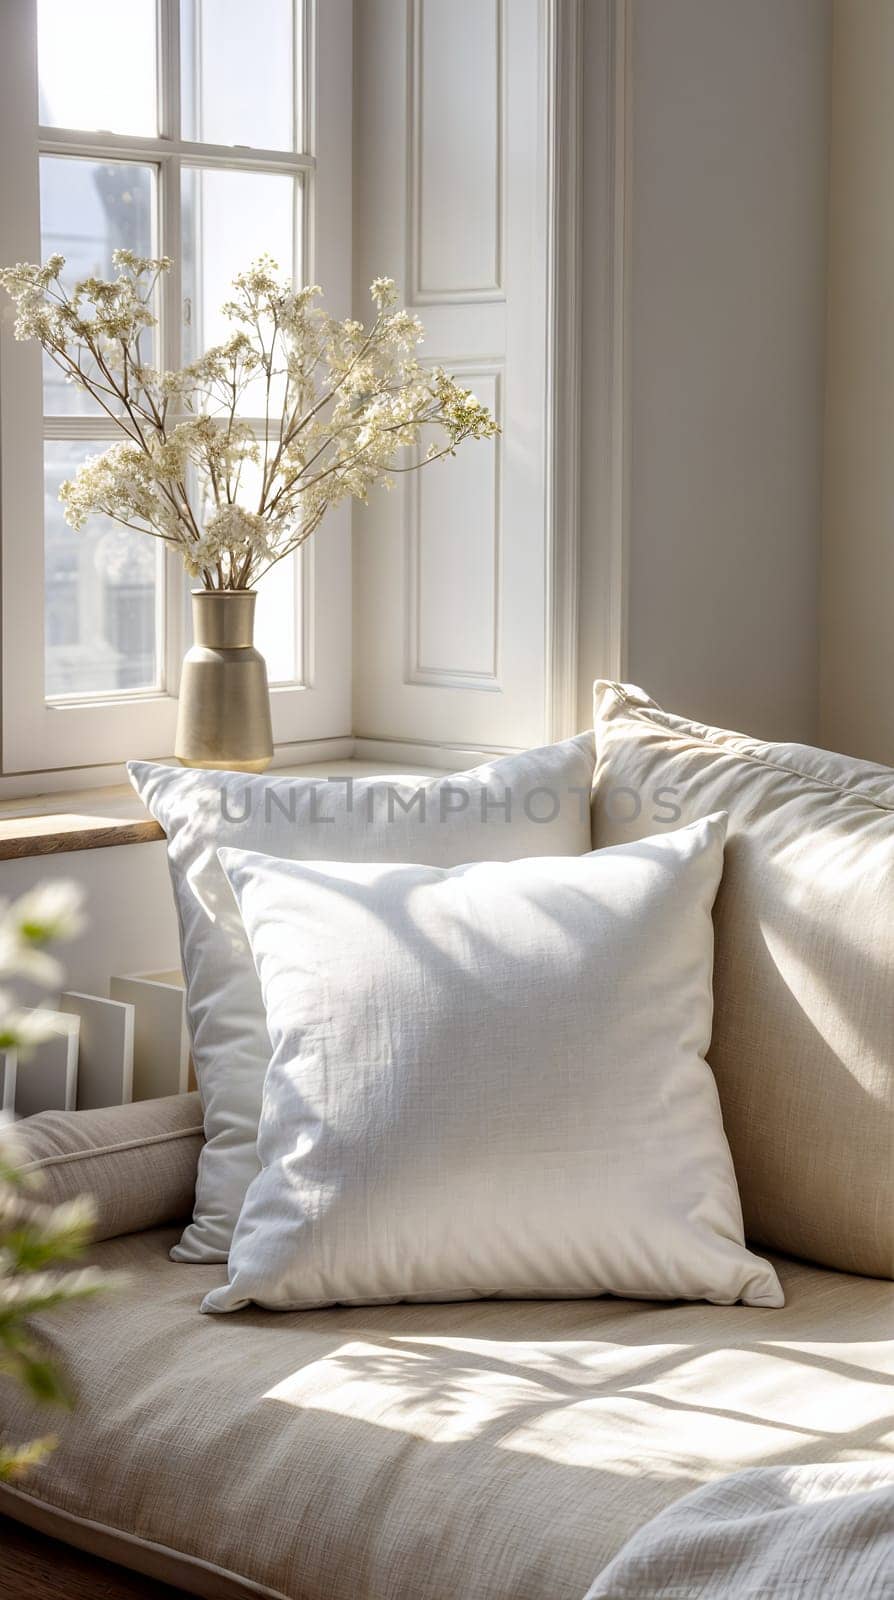 Cozy sunlit corner with cushions and vase by chrisroll